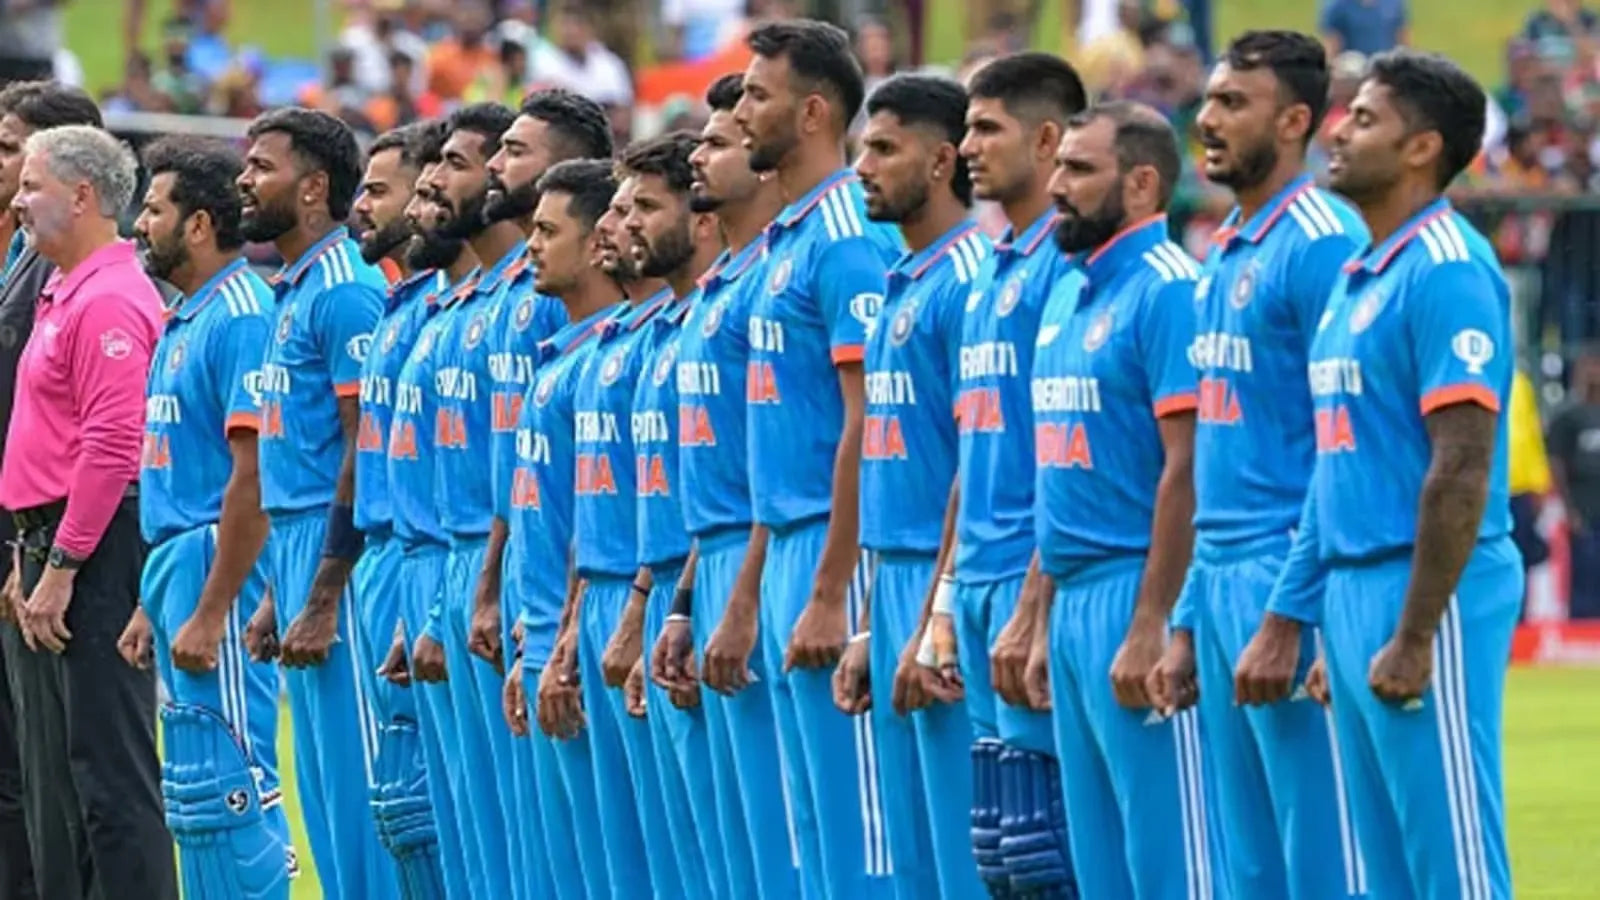 The Indian Cricket Team standing together for the National Anthem before the game